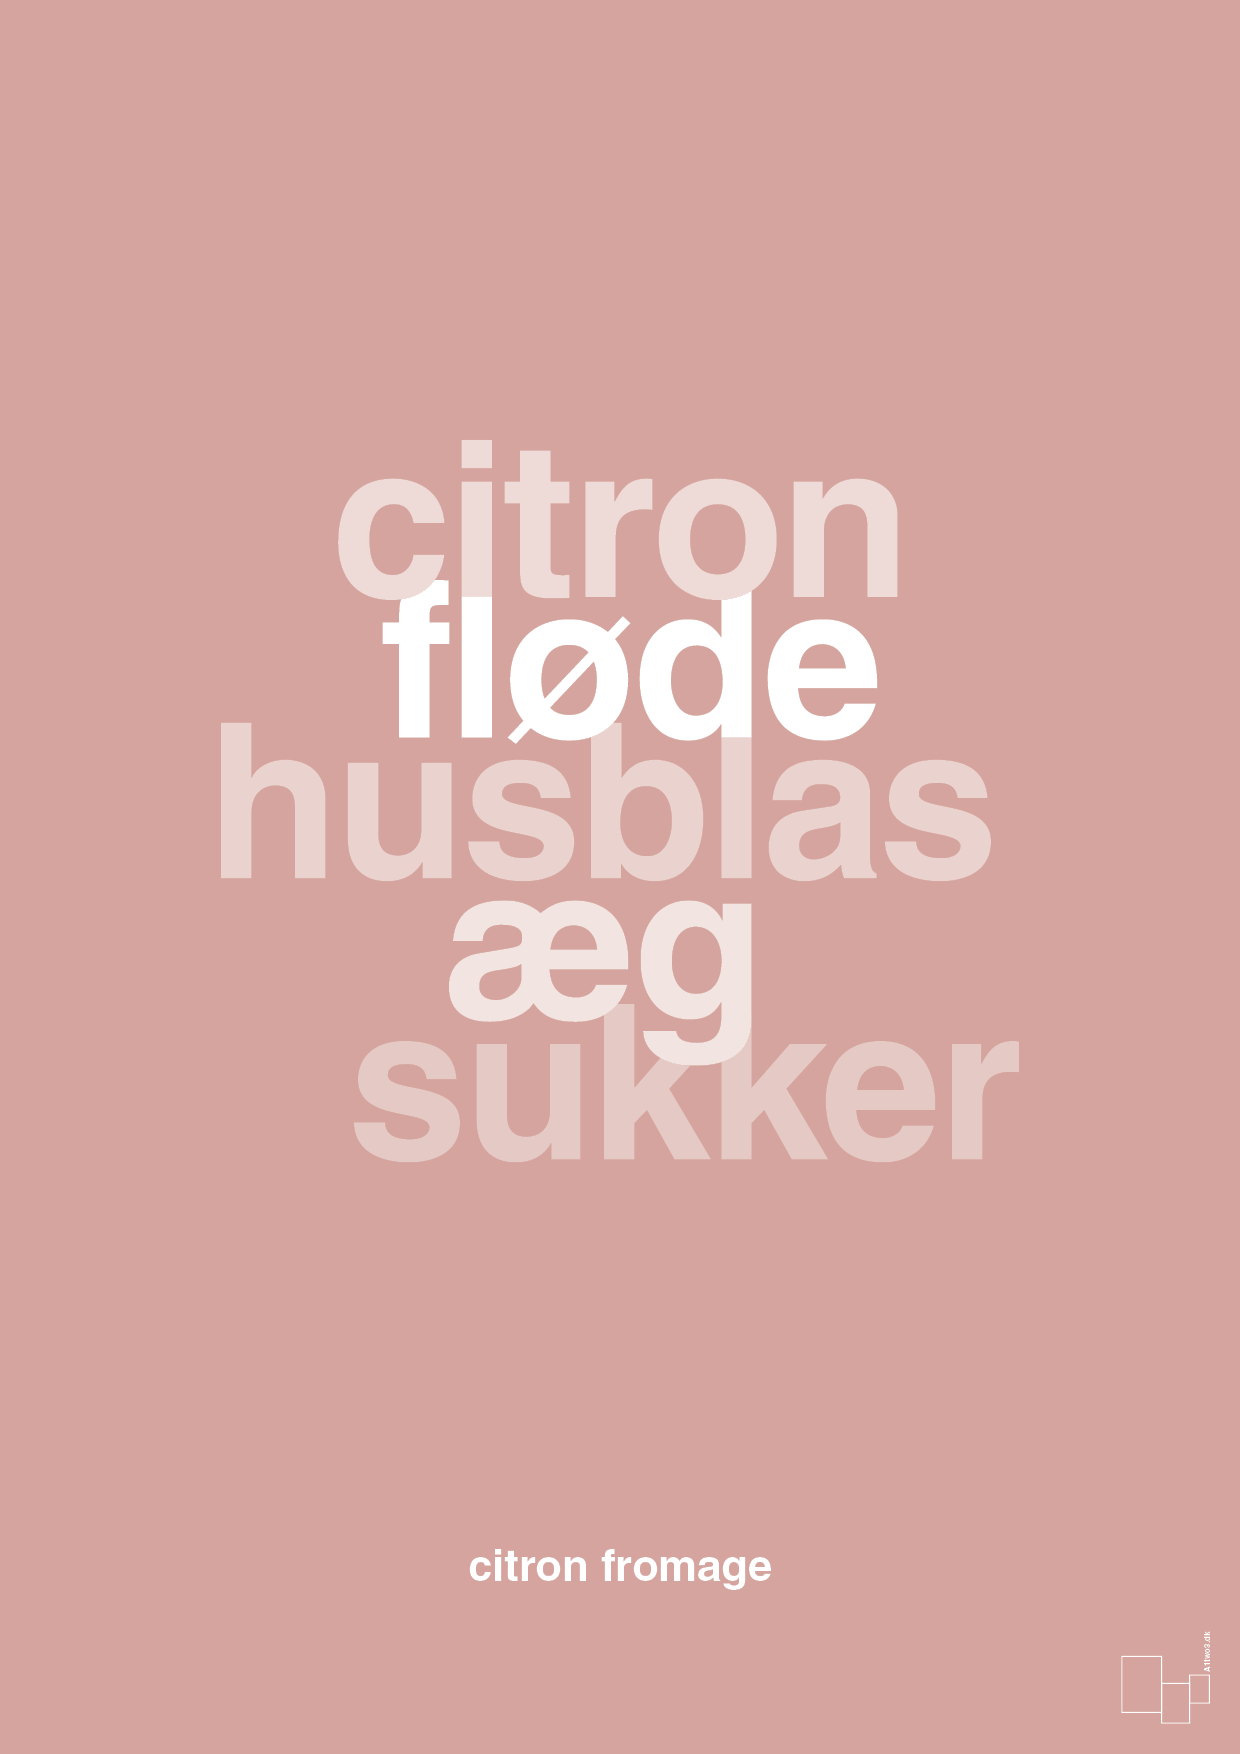 citron fromage - Plakat med Mad & Drikke i Bubble Shell